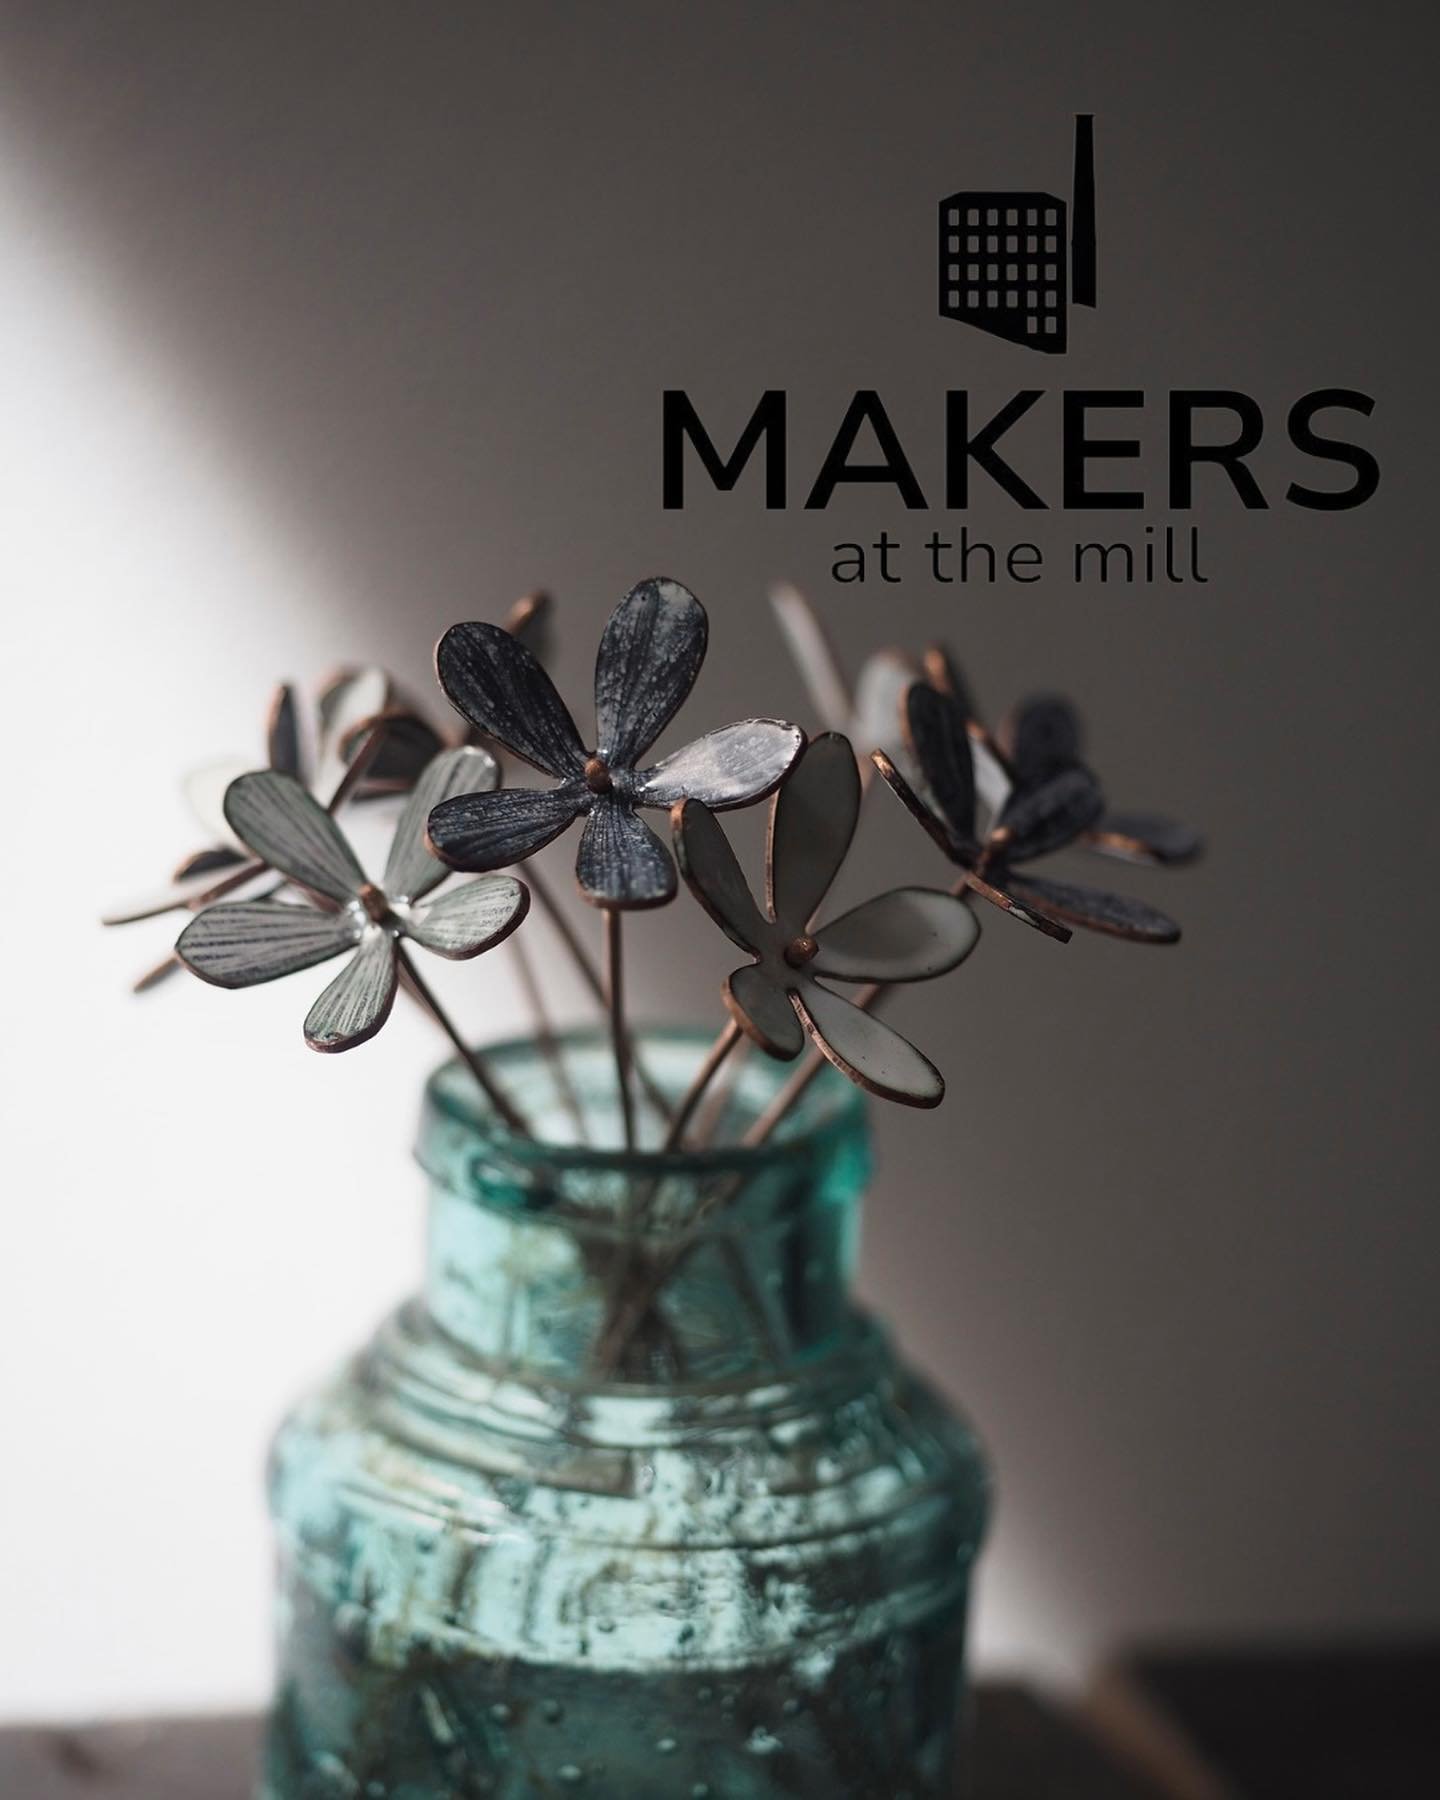 Very much looking forward to showing my work at Torr Vale Mill this weekend with @makersattvmill 
It&rsquo;s an event I&rsquo;ve been trying to get to for a couple of years now but couldn&rsquo;t for one reason or another so I&rsquo;m excited to fina